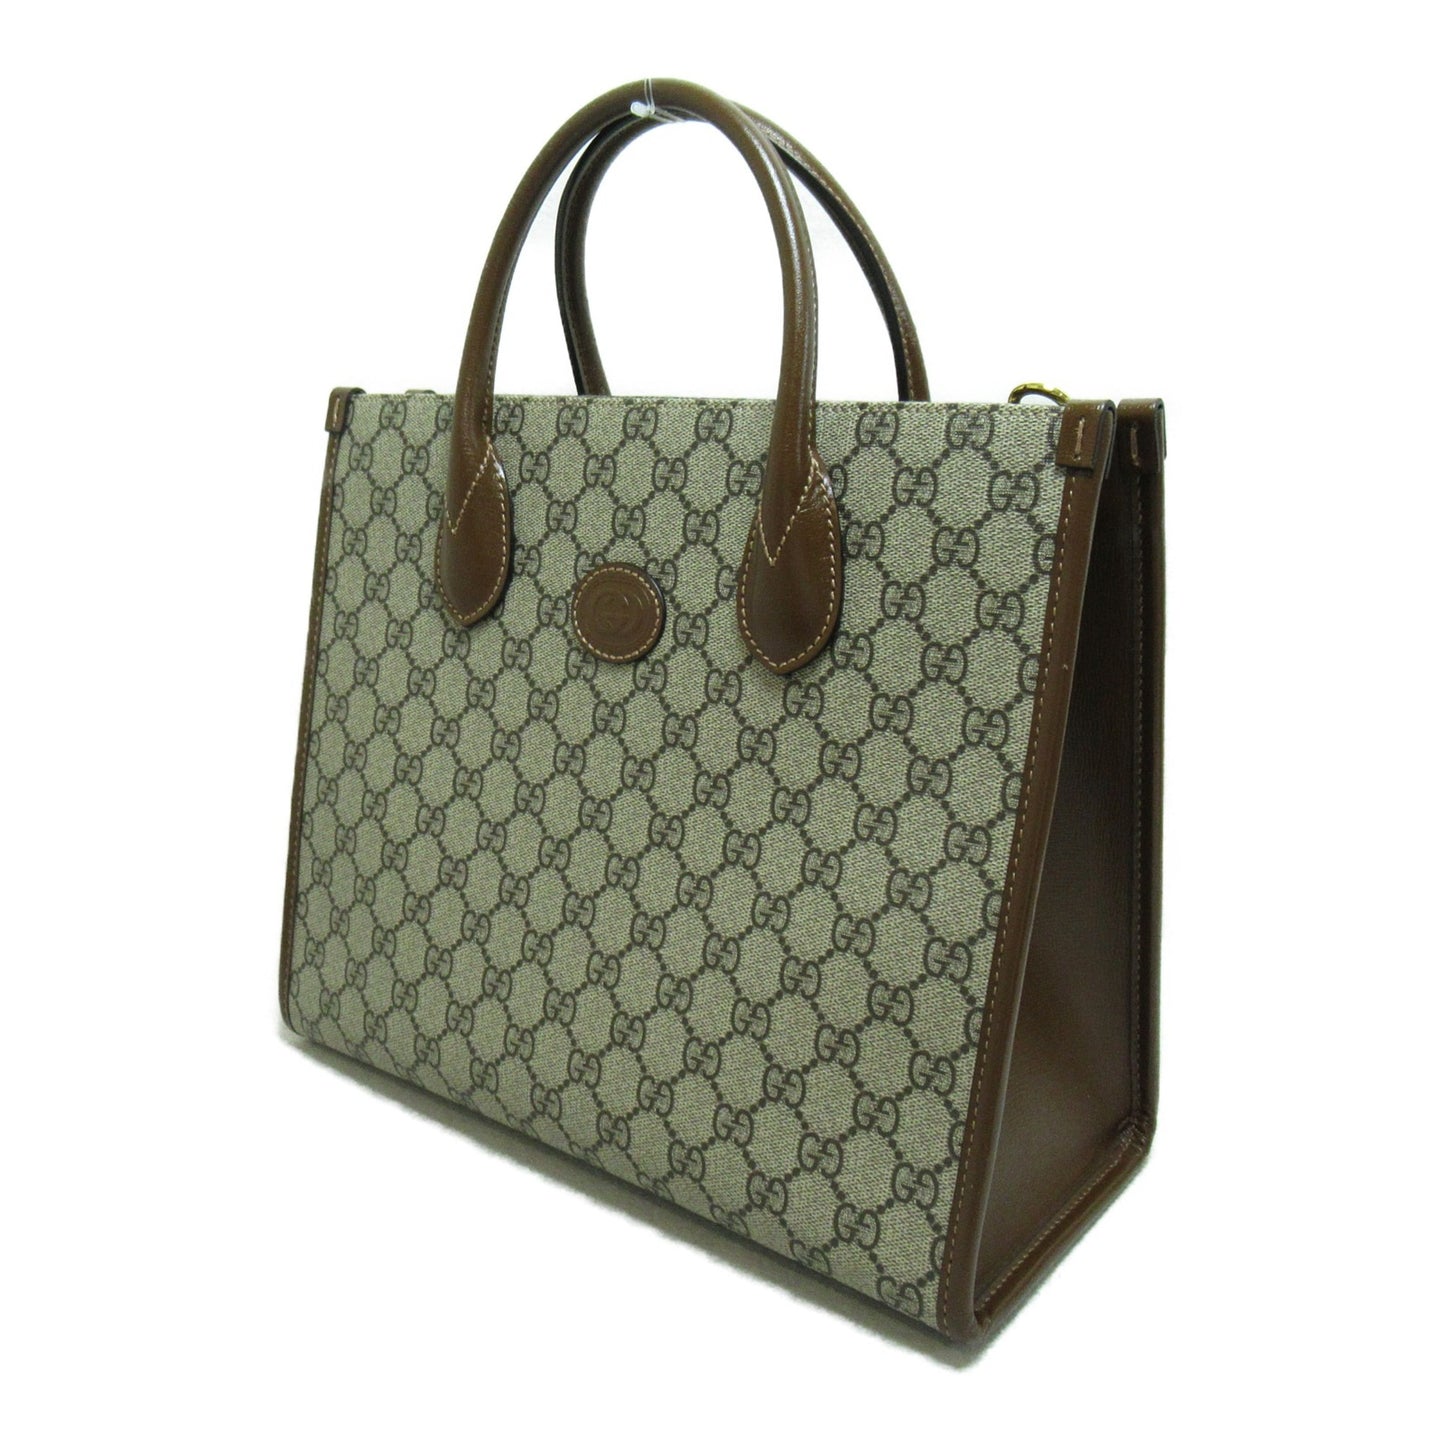 Gucci Women's Beige Canvas Tote Bag with Timeless Style and Functionality in Beige